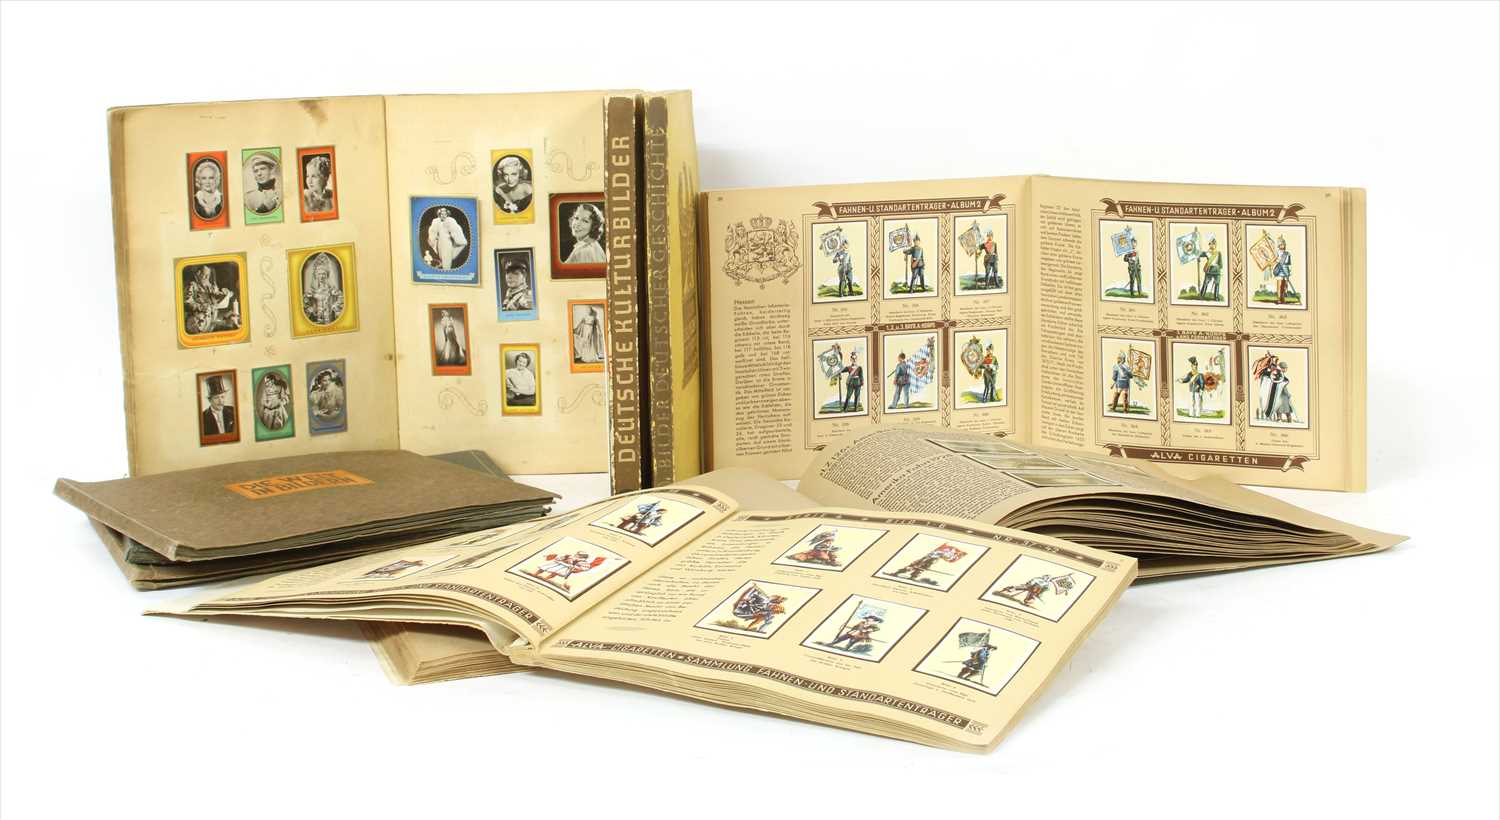 Lot 112 - A collection of predominately German cigarette cards